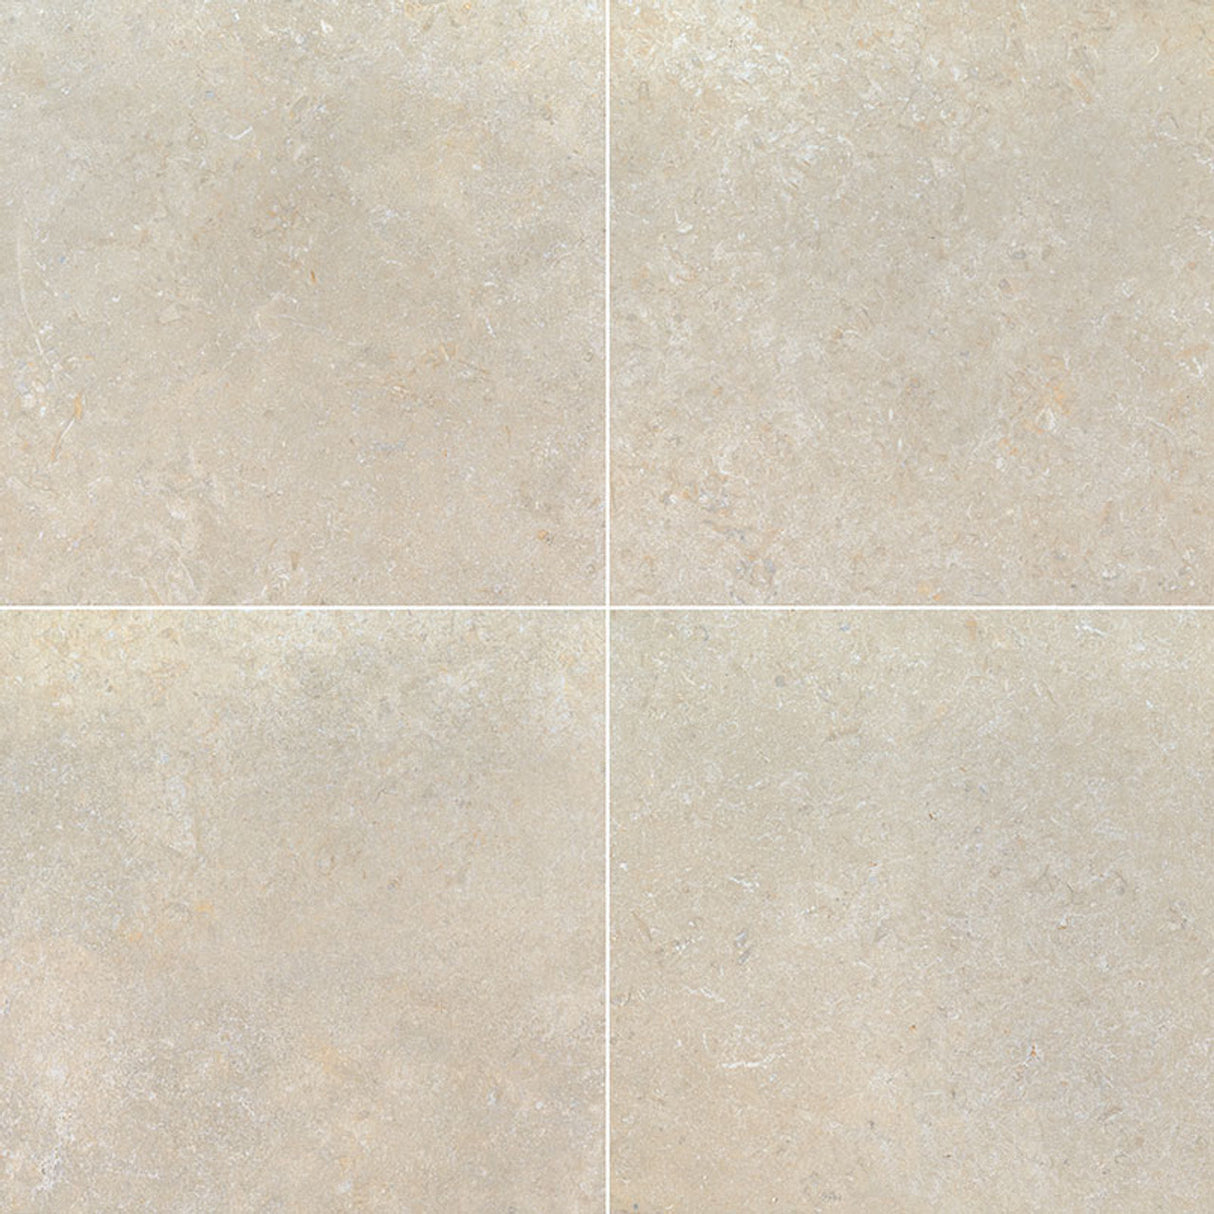 living style pearl 24x24 glazed porcelain floor and wall tile msi collection product shot multiple tiles angle view #Size_24"x24"